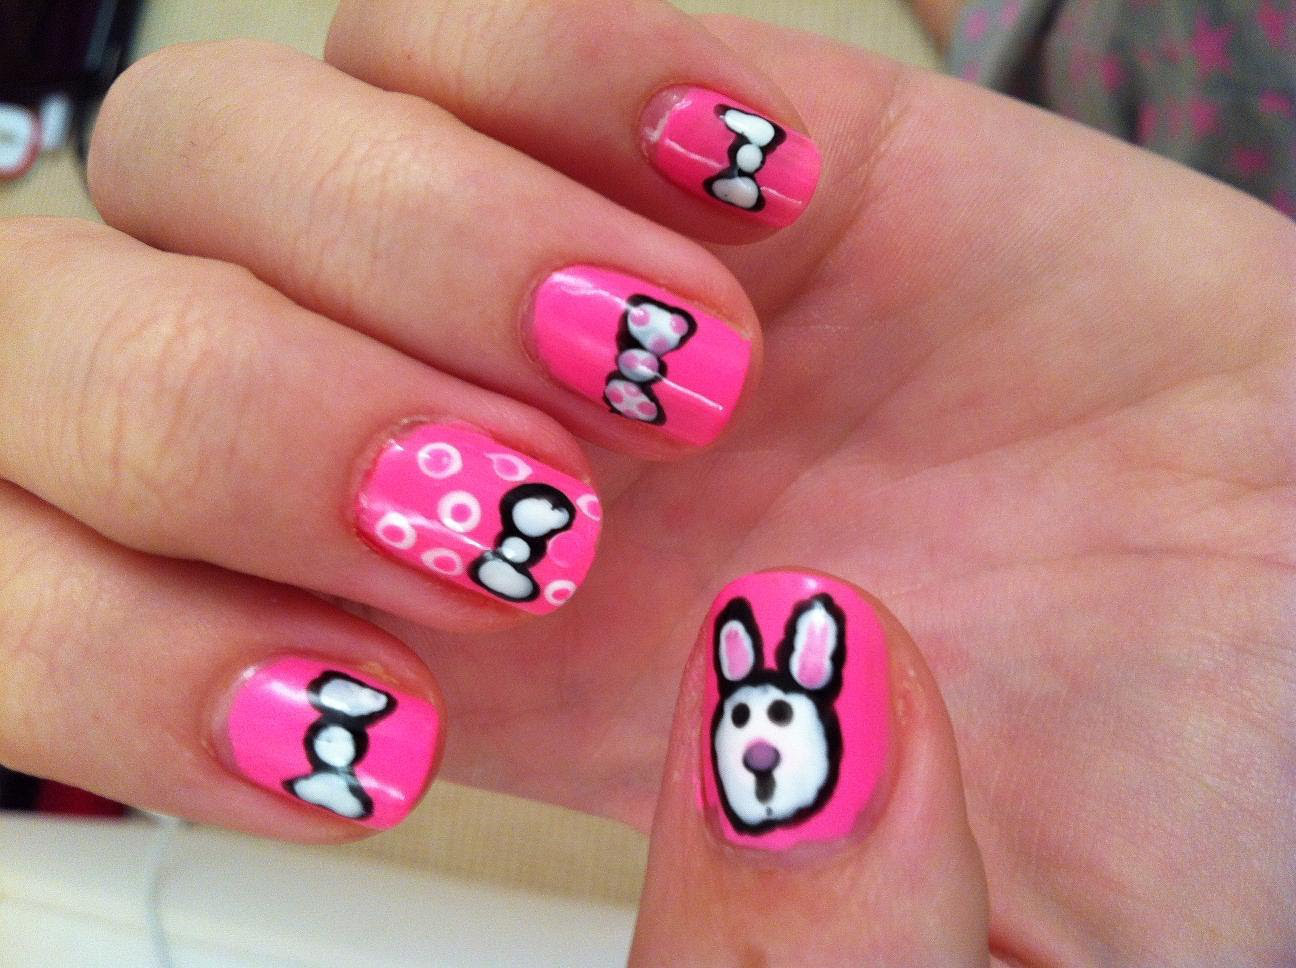 3. Fun and Colorful Nail Designs for Teen Girls - wide 7